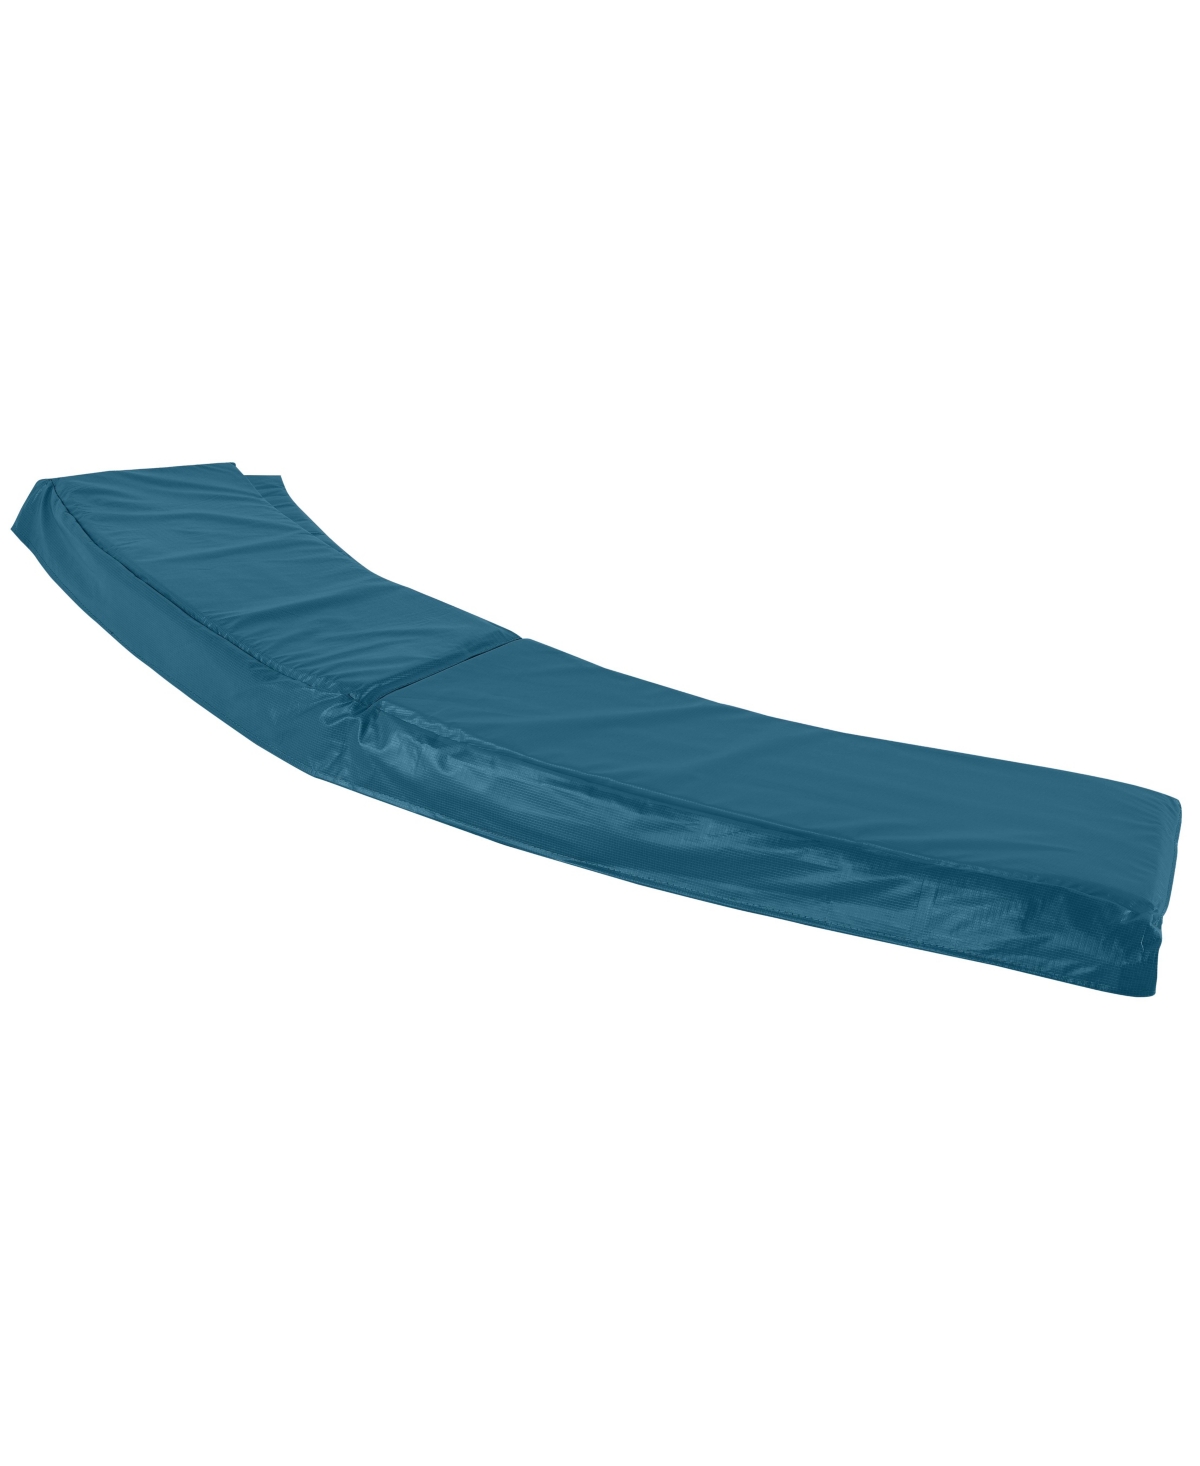 Upperbounce Super Trampoline Replacement Safety Pad Fits For 14' Round Frames - Aqua In Blue